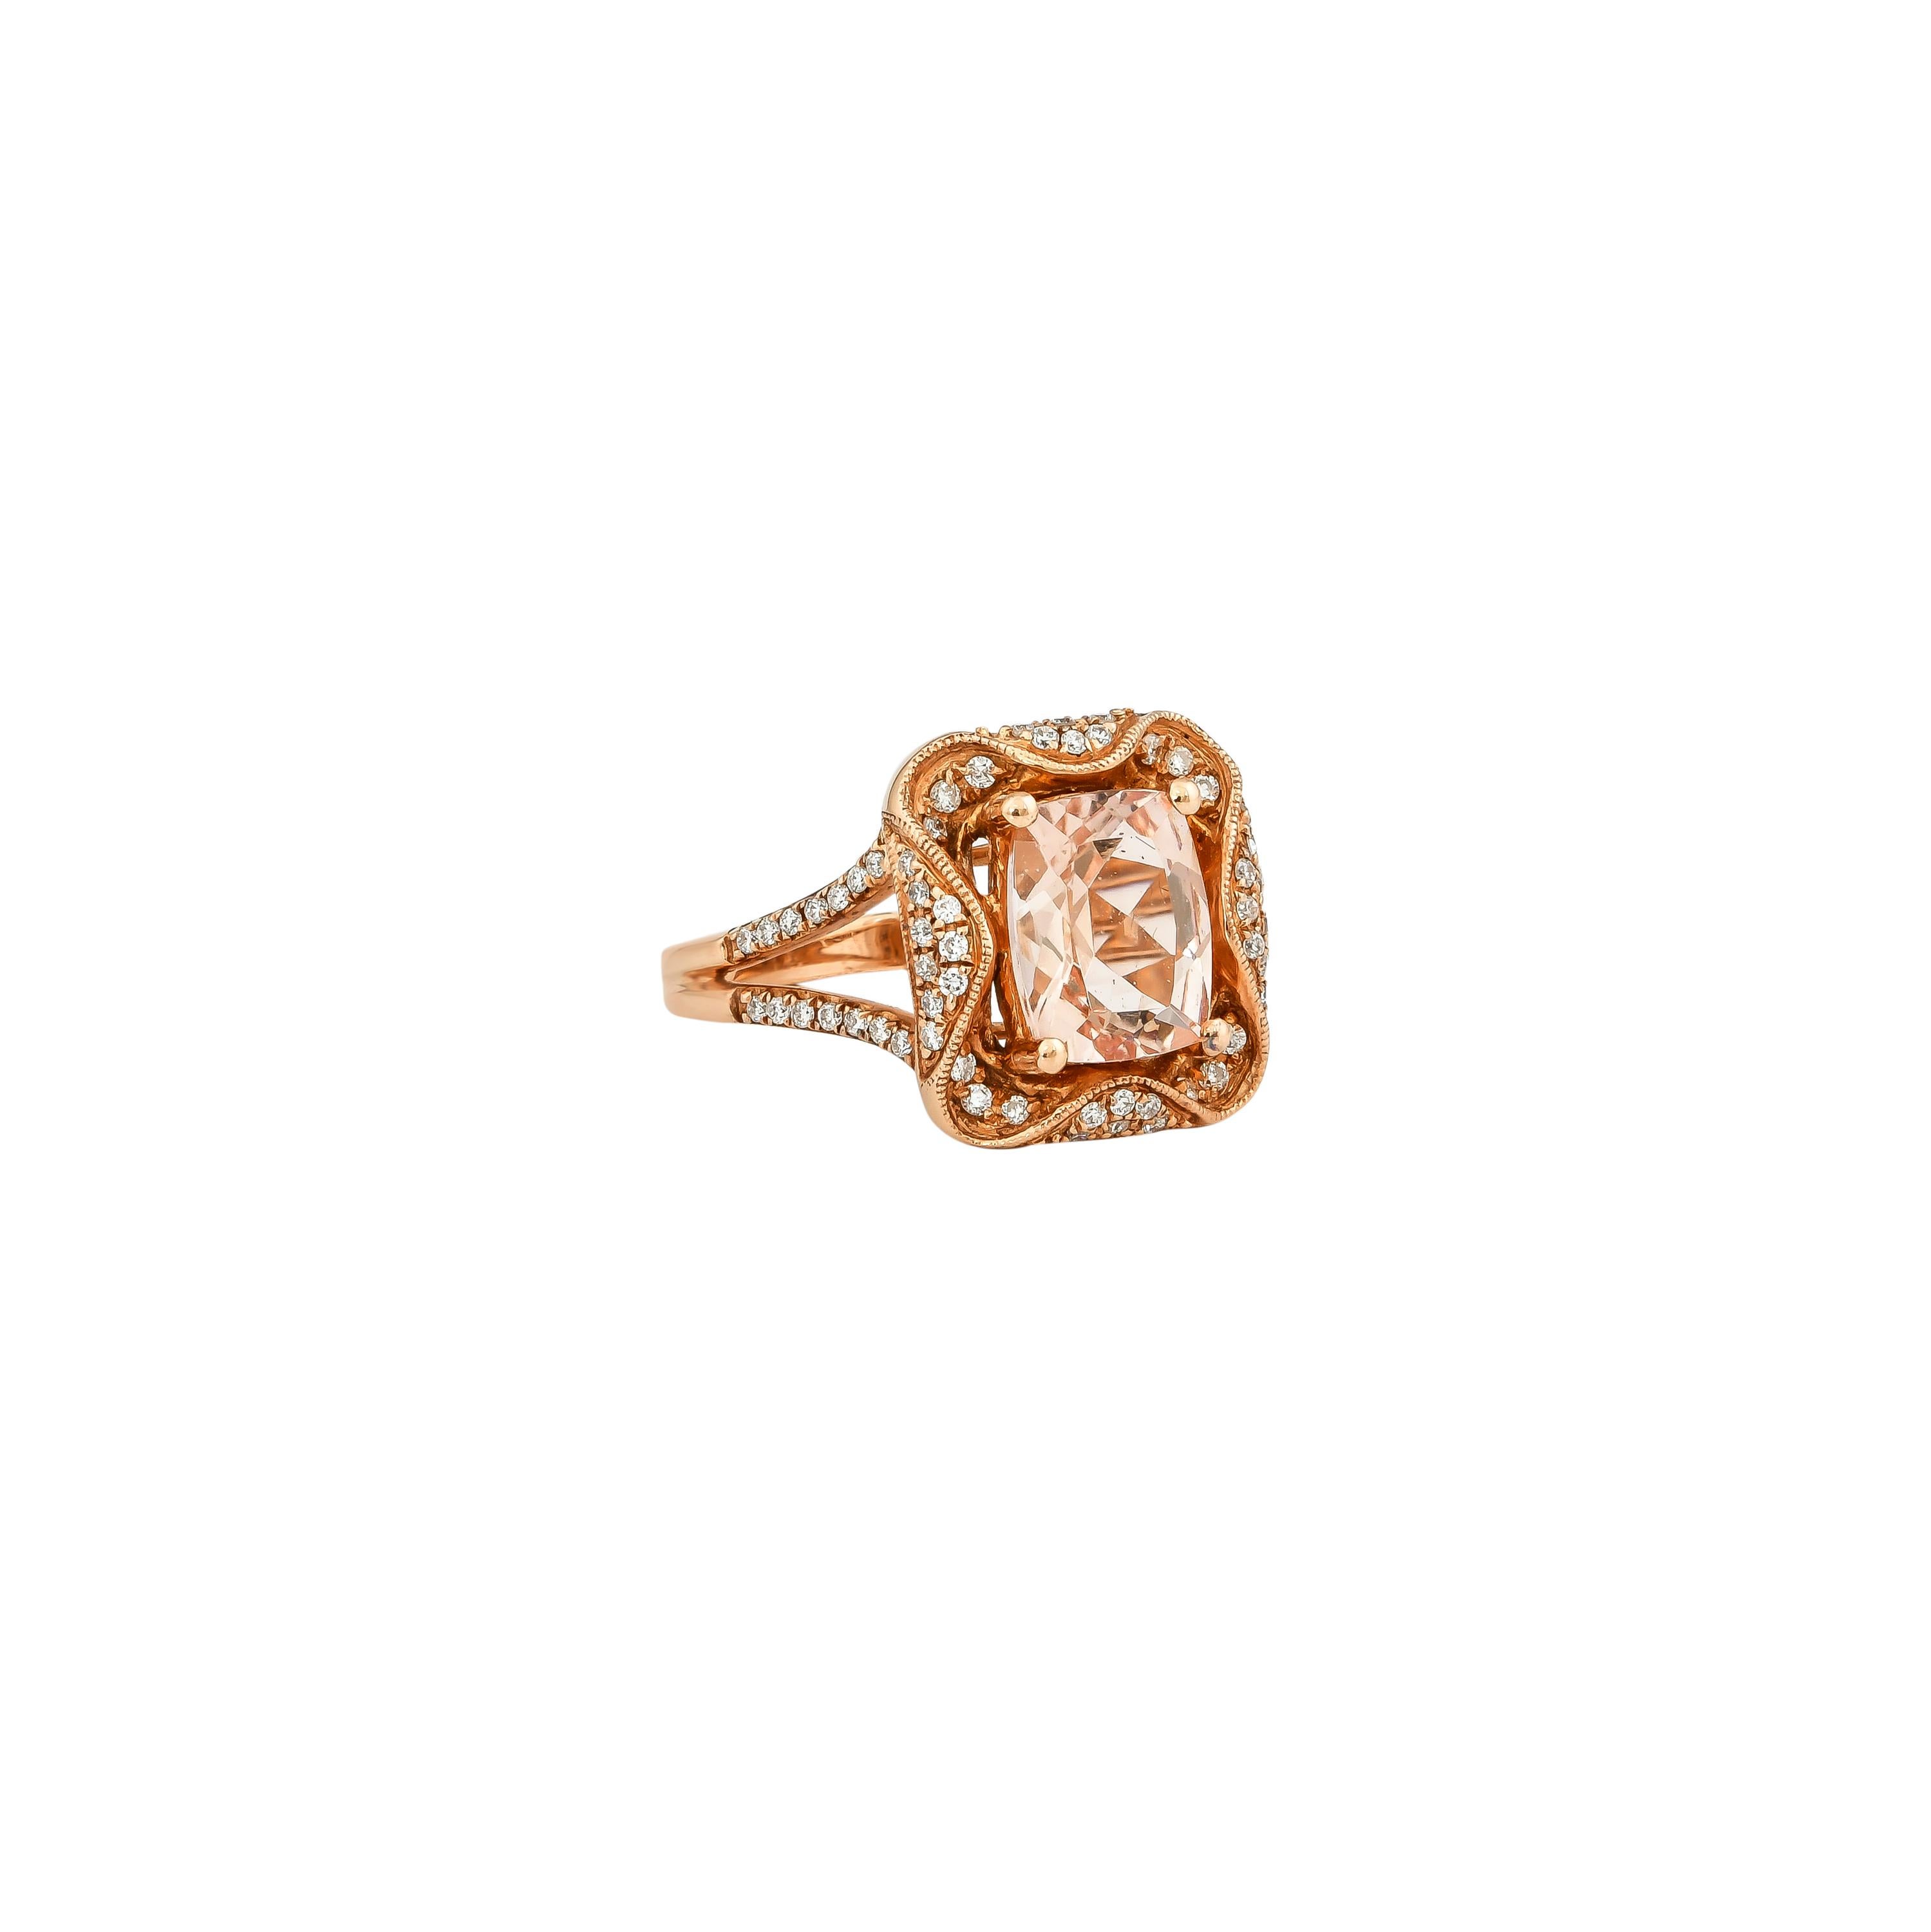 This collection features an array of magnificent morganites! Accented with Diamonds these rings are made in rose gold and present a classic yet elegant look. 

Classic morganite ring in 18K Rose gold with Diamond. 

Morganite: 1.99 carat, 9X7mm